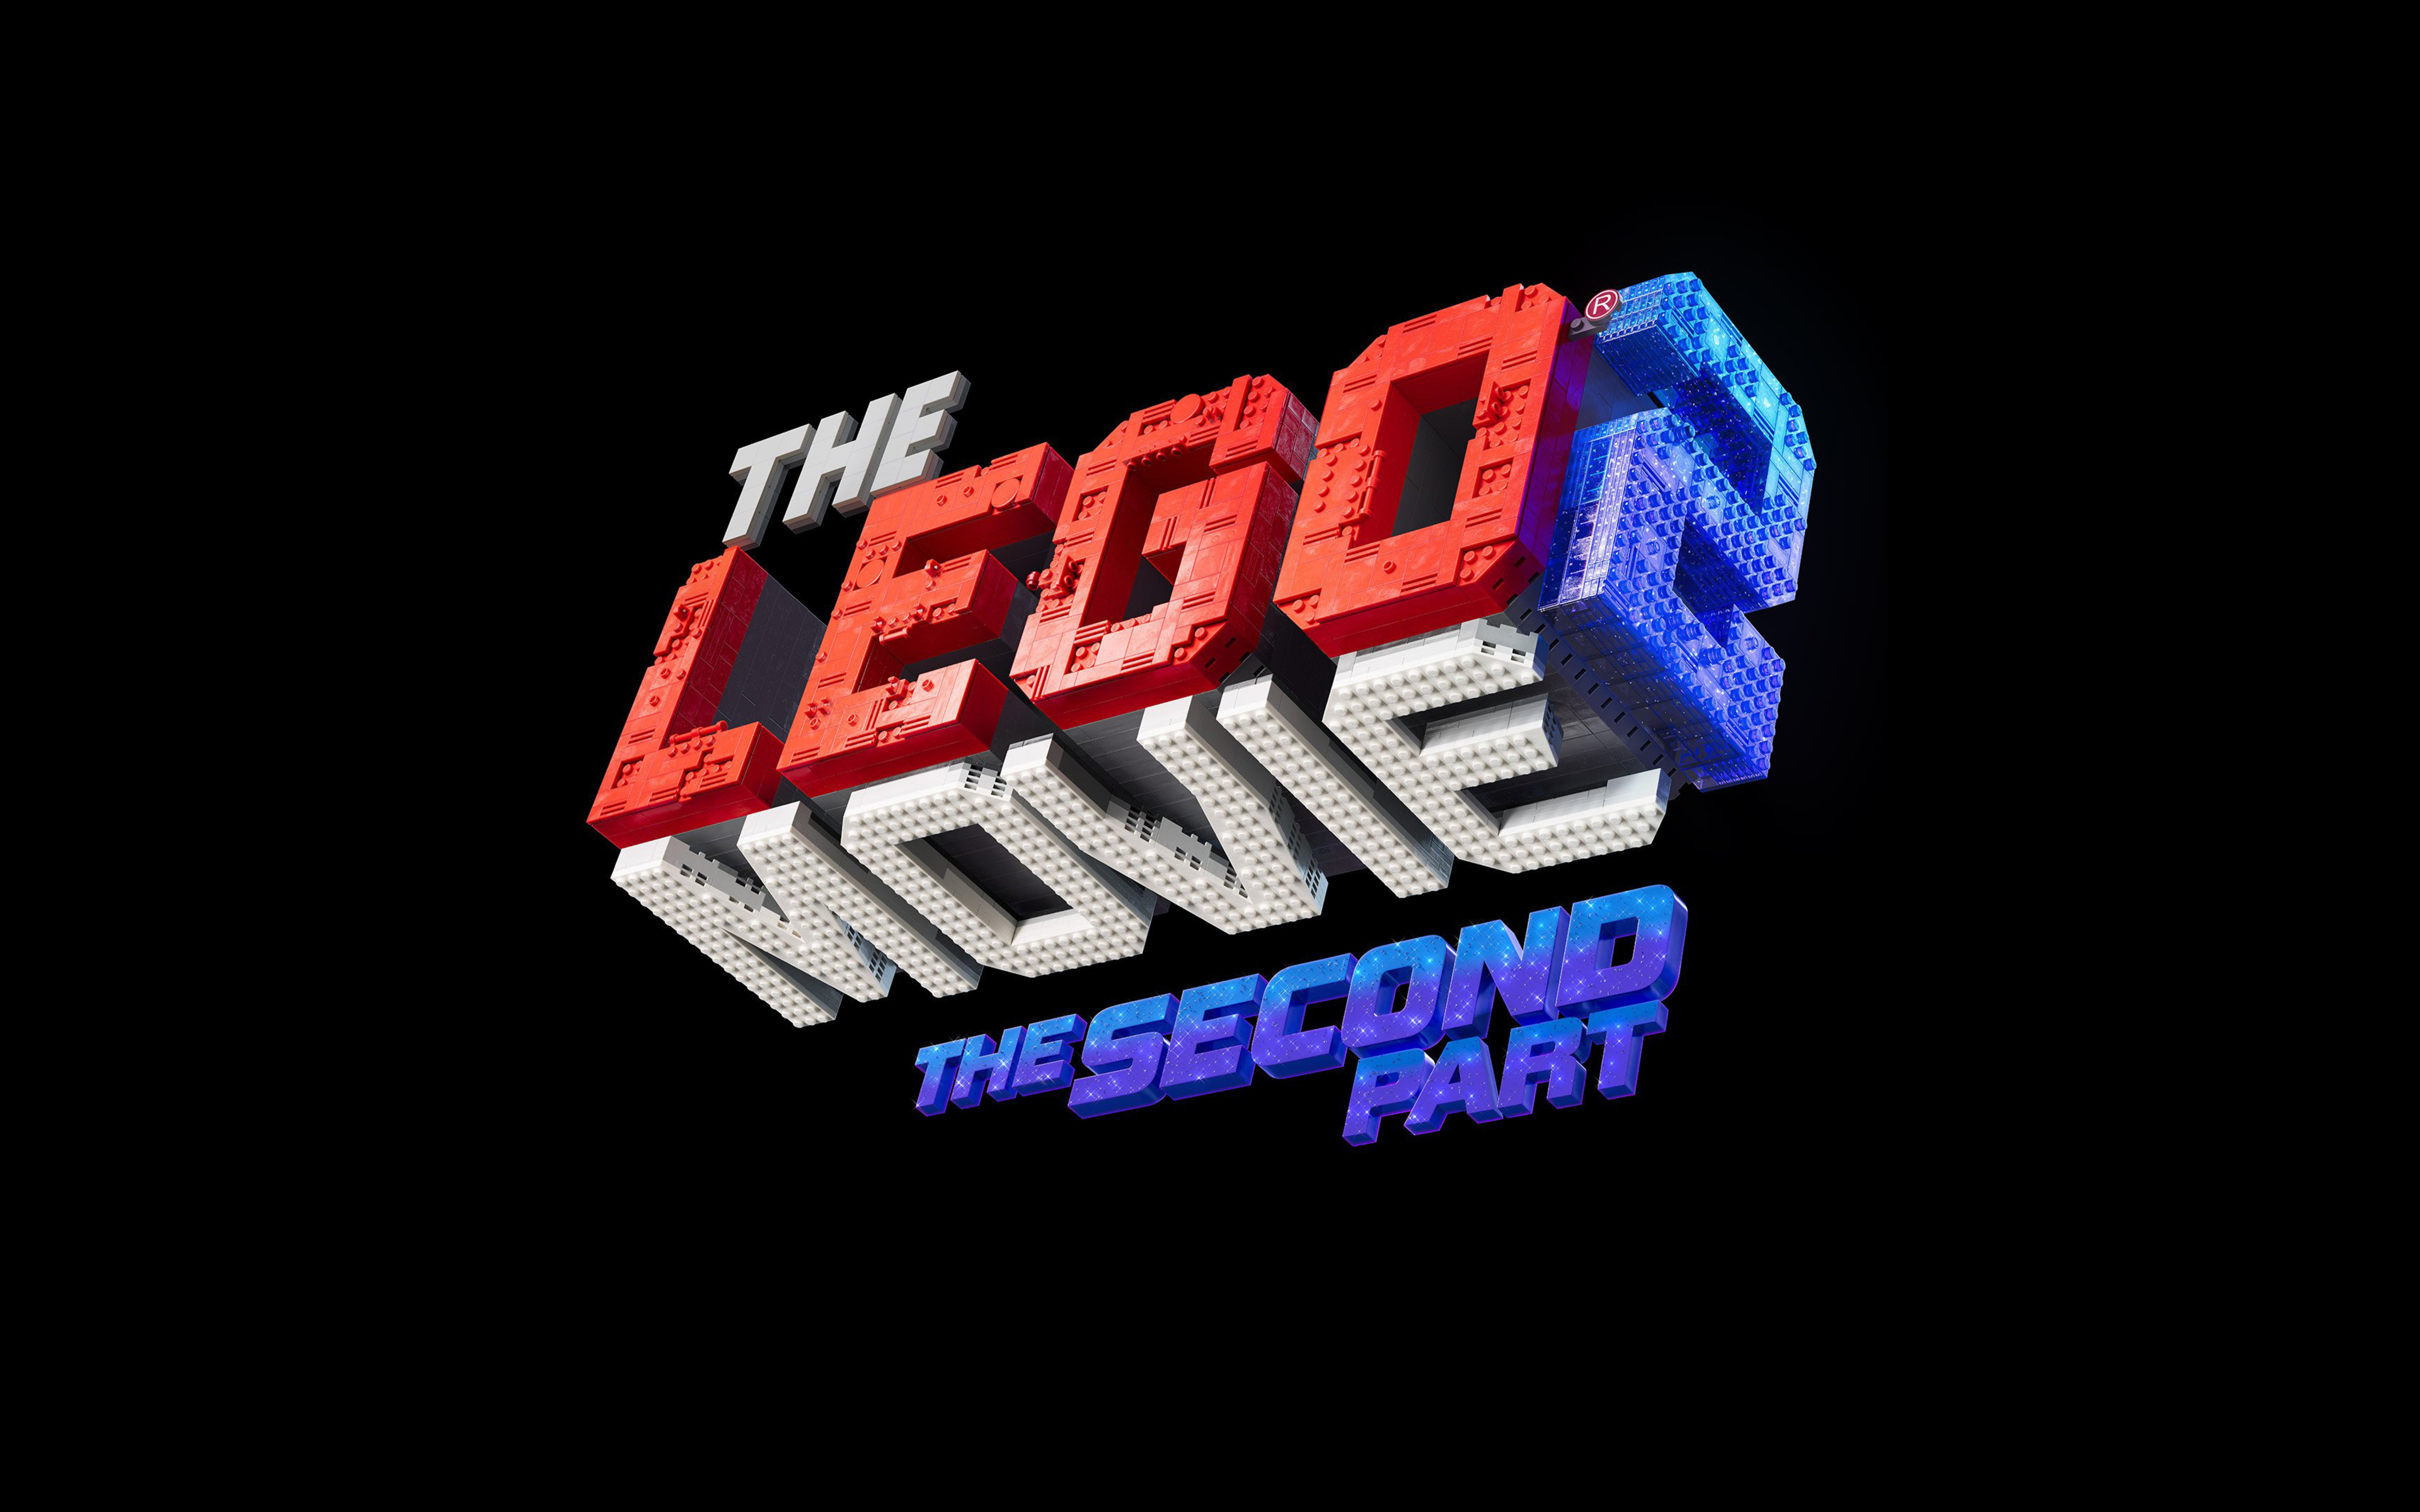 Movie The Lego Movie 2: The Second Part HD Wallpaper | Background Image